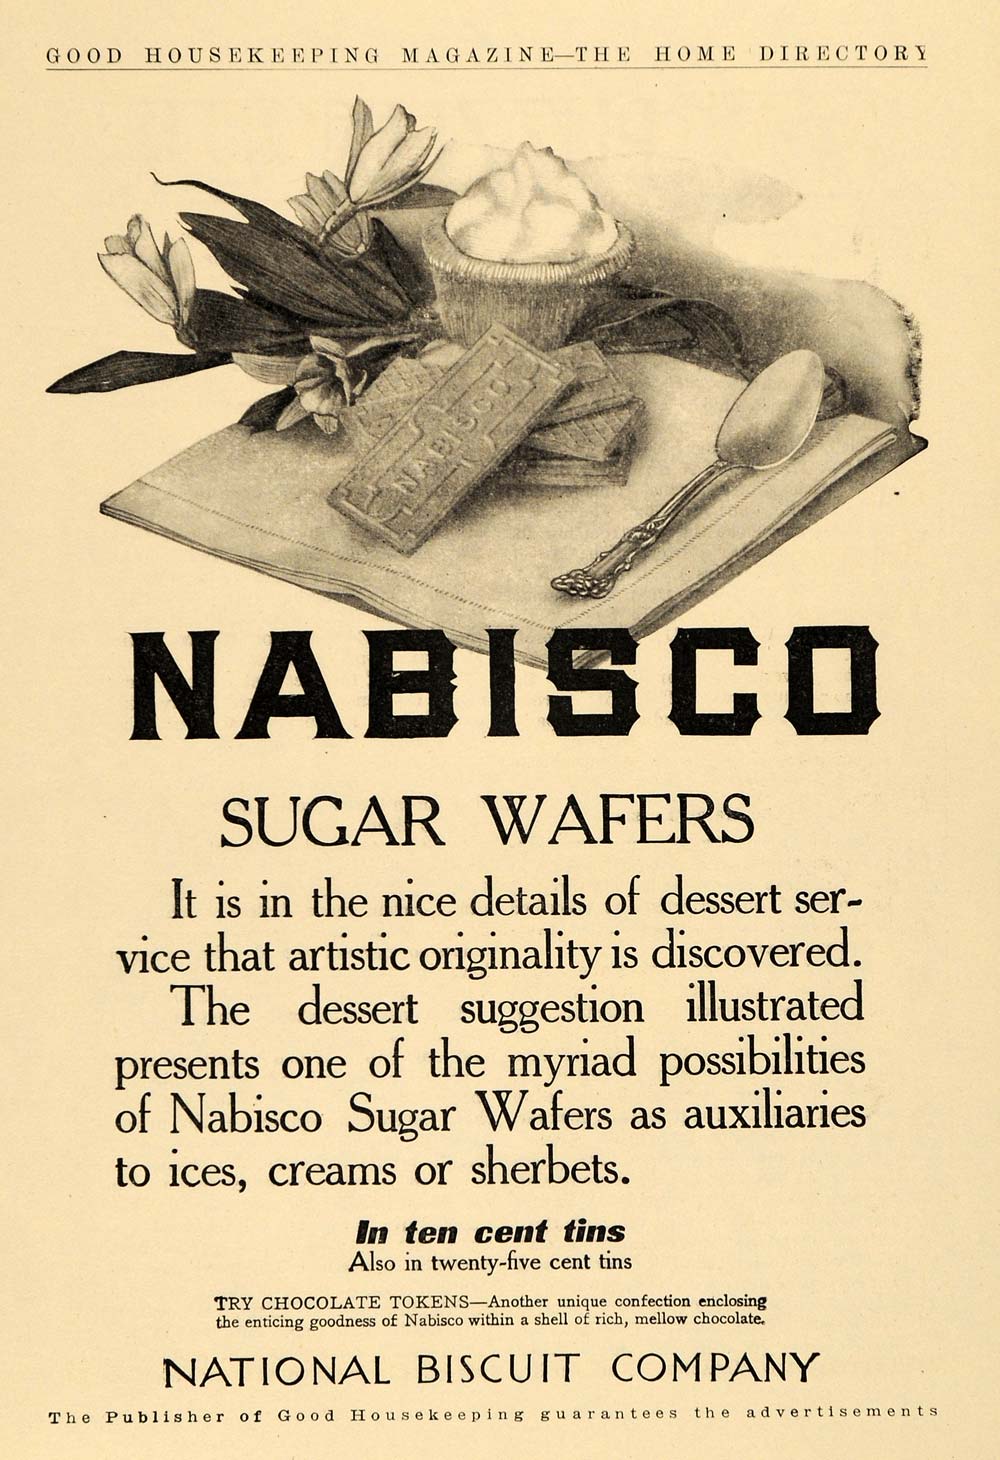 1910 Ad National Biscuit Co Nabisco Sugar Wafers Sweets - ORIGINAL GH2